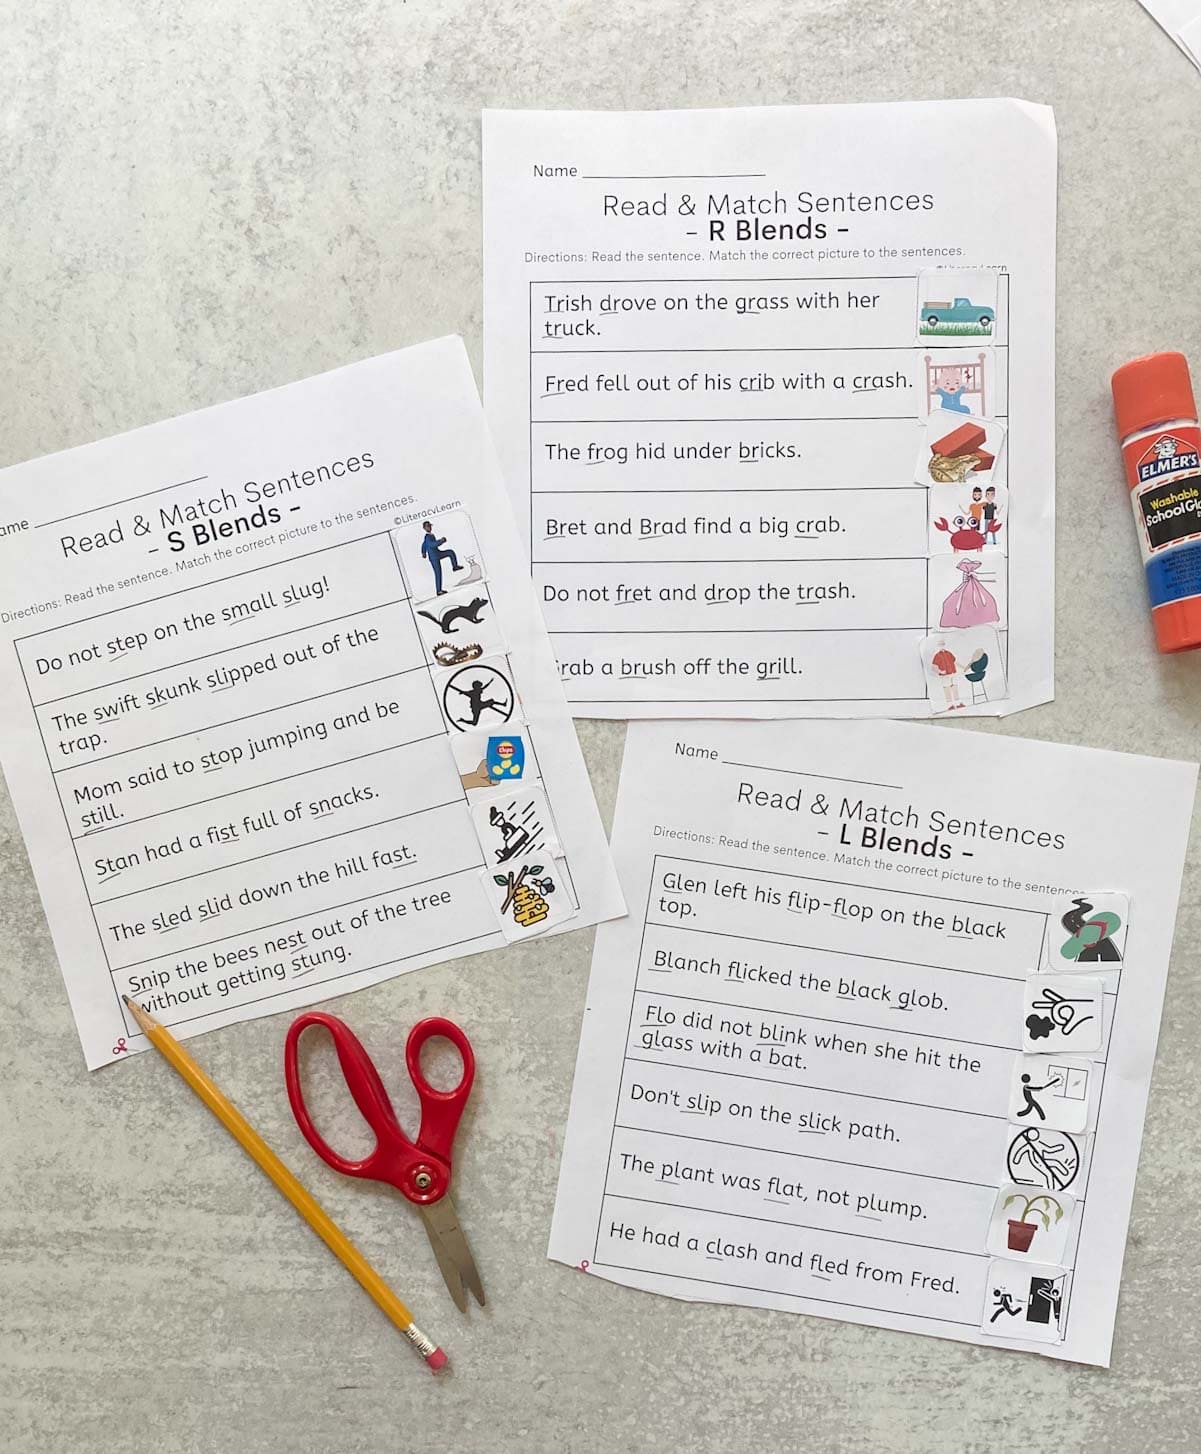 Three completed blends worksheets with a glue stick and scissors. 